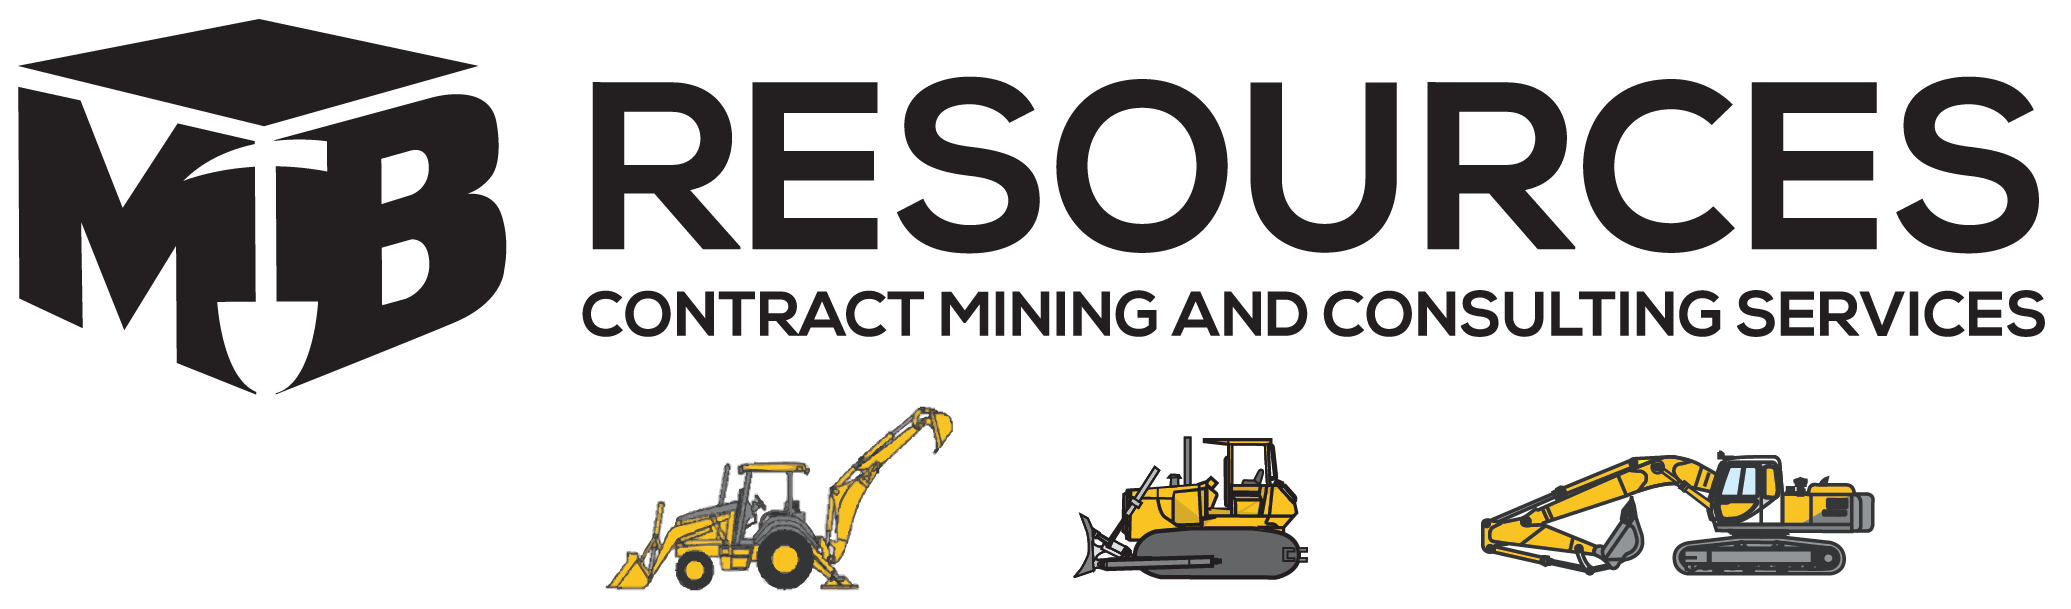 MB Resources